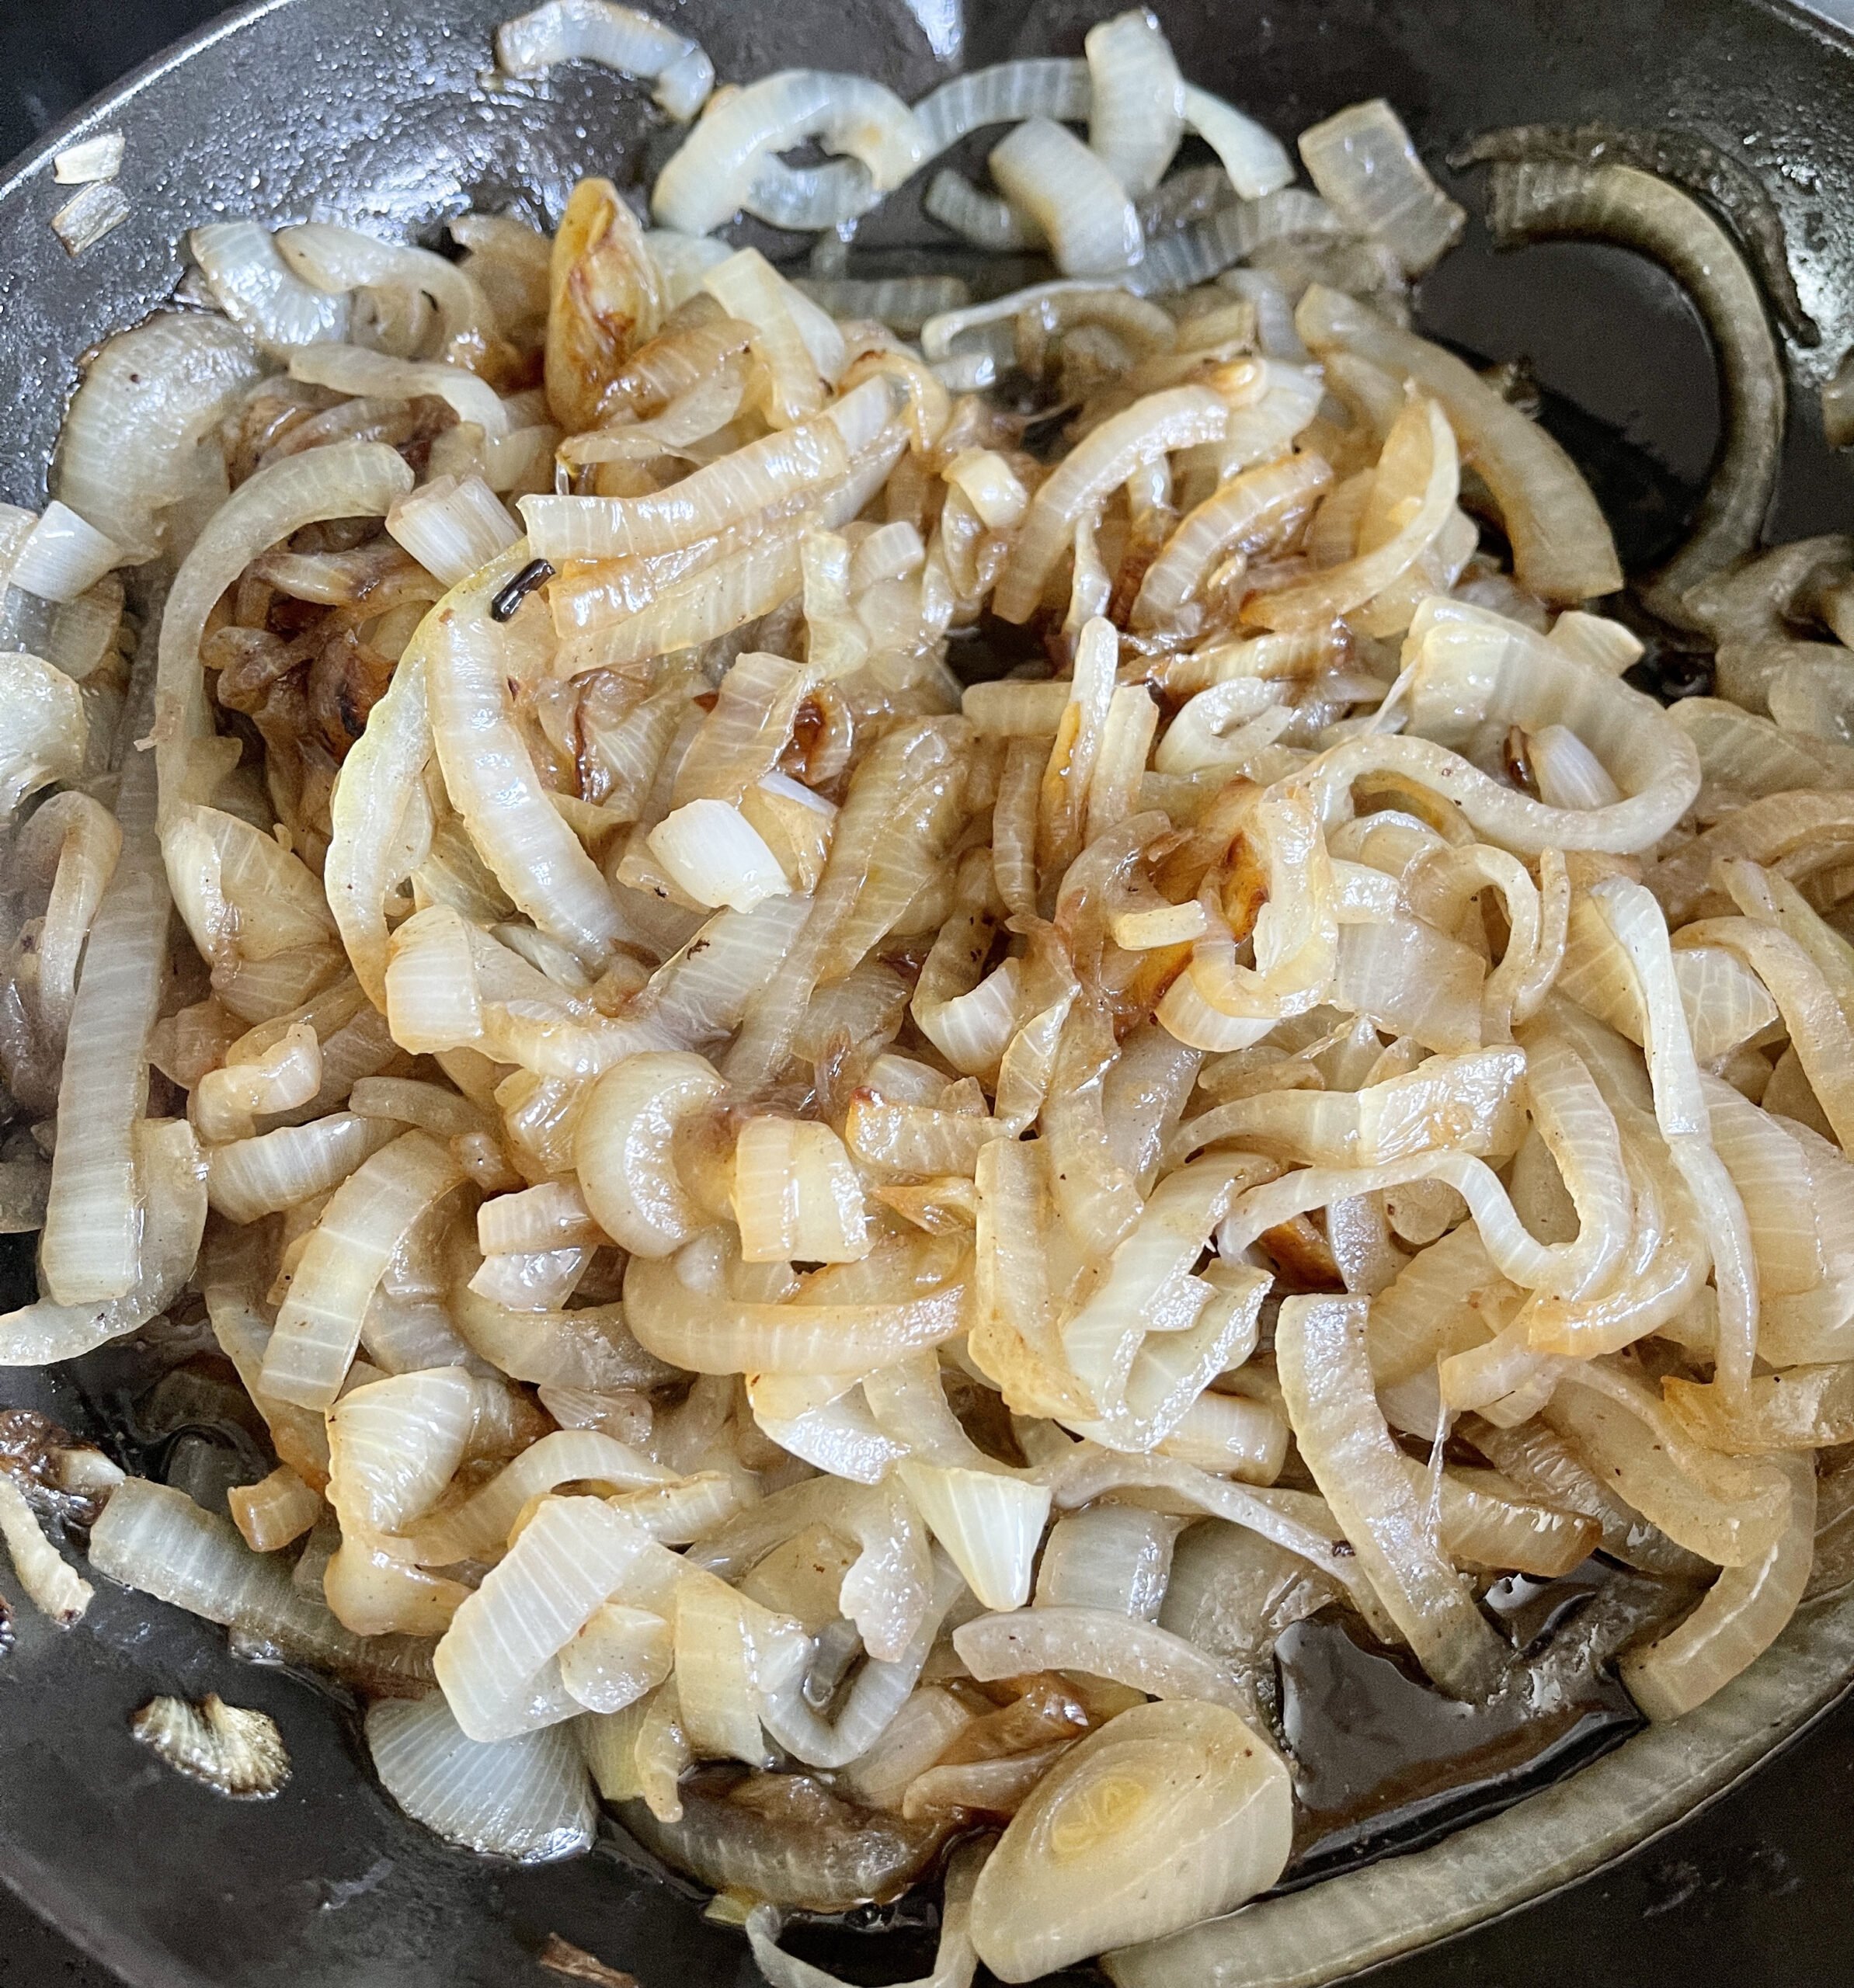 ONIONS COOKING DOWN TO CARAMELIZE